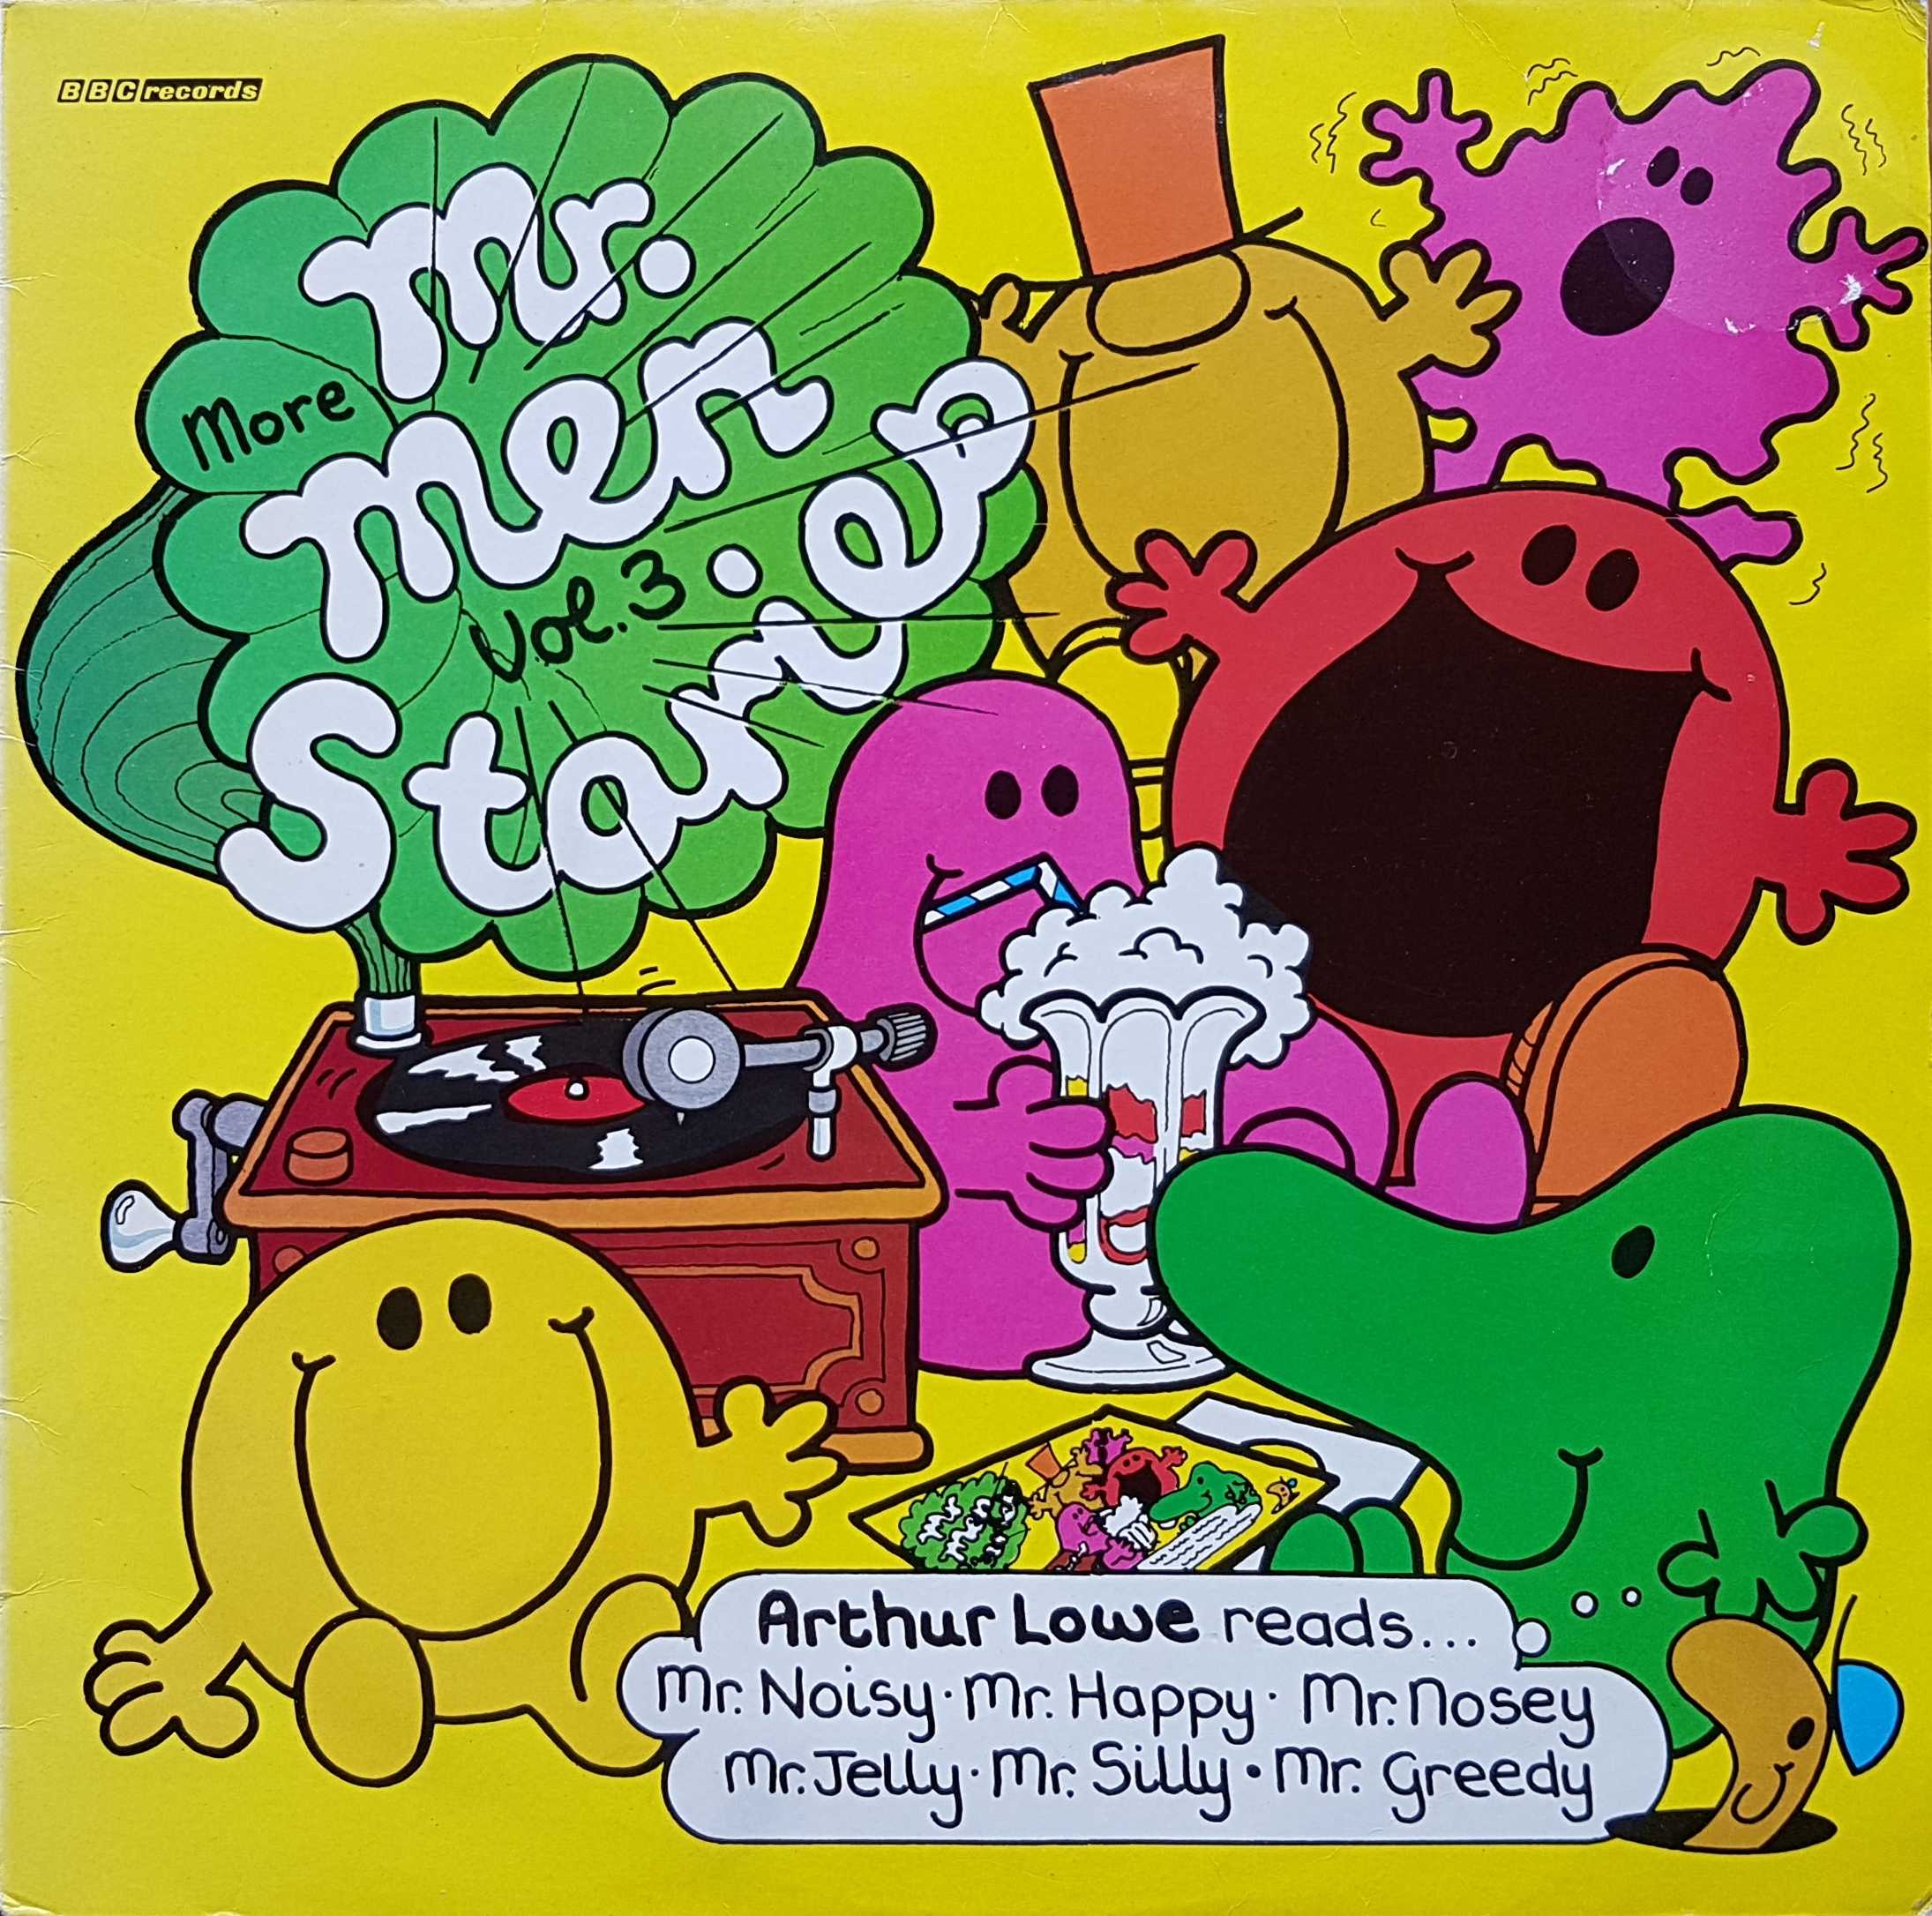 Picture of REC 457 More Mr. Men stories - Volume 3 by artist Roger Hargreaves / Arthur Lowe from the BBC albums - Records and Tapes library